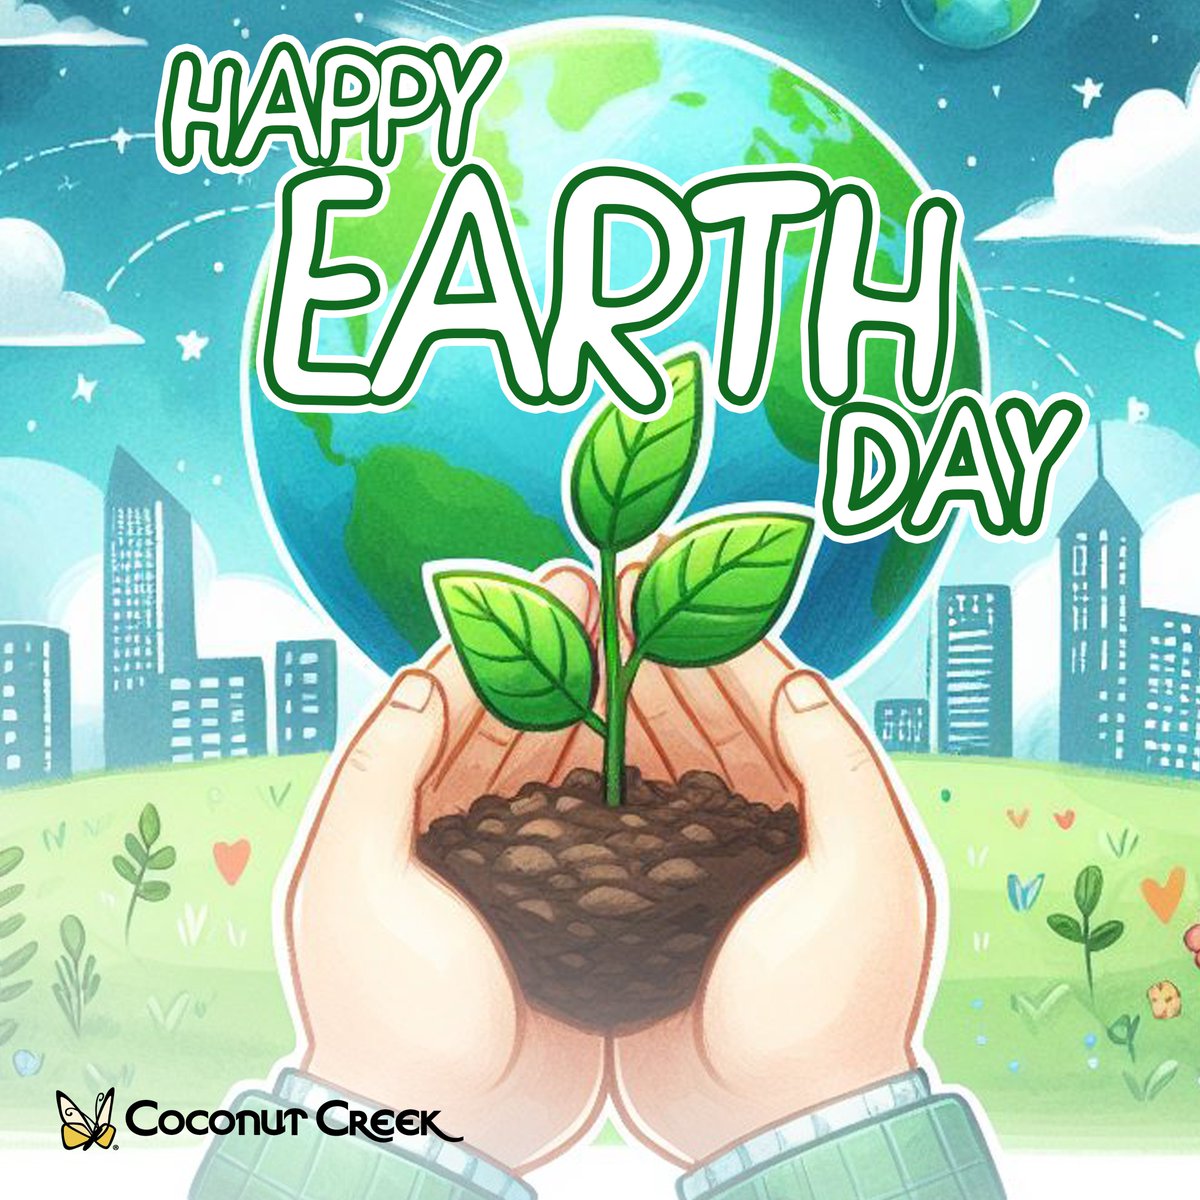 Happy Earth Day! To honor our commitment to keeping Coconut Creek green, we're giving away FREE TREES this coming weekend! Don't miss out! More details at CoconutCreek.net/ArborDay